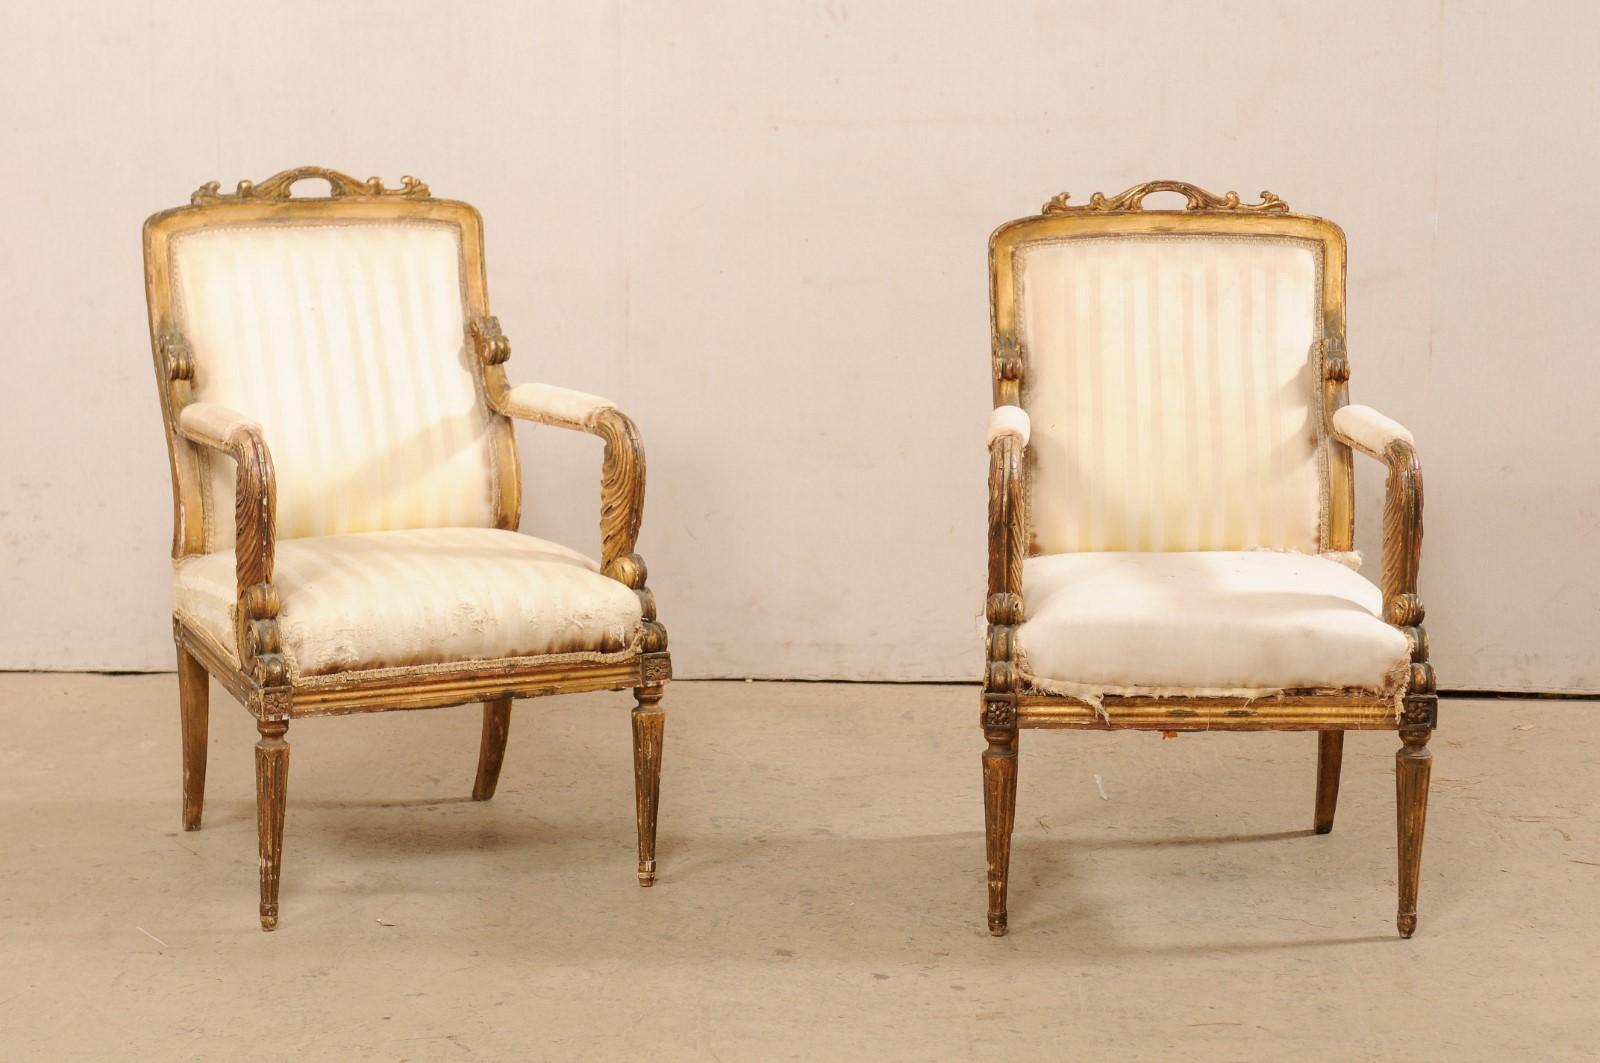 A French pair of Louis XVI style, carved-wood fauteuil armchairs from the early 19th century. This antique pair of armchairs from France, are hand-carved in the in the influences of Louis XVI period, each featuring rectangular-backs with a raised